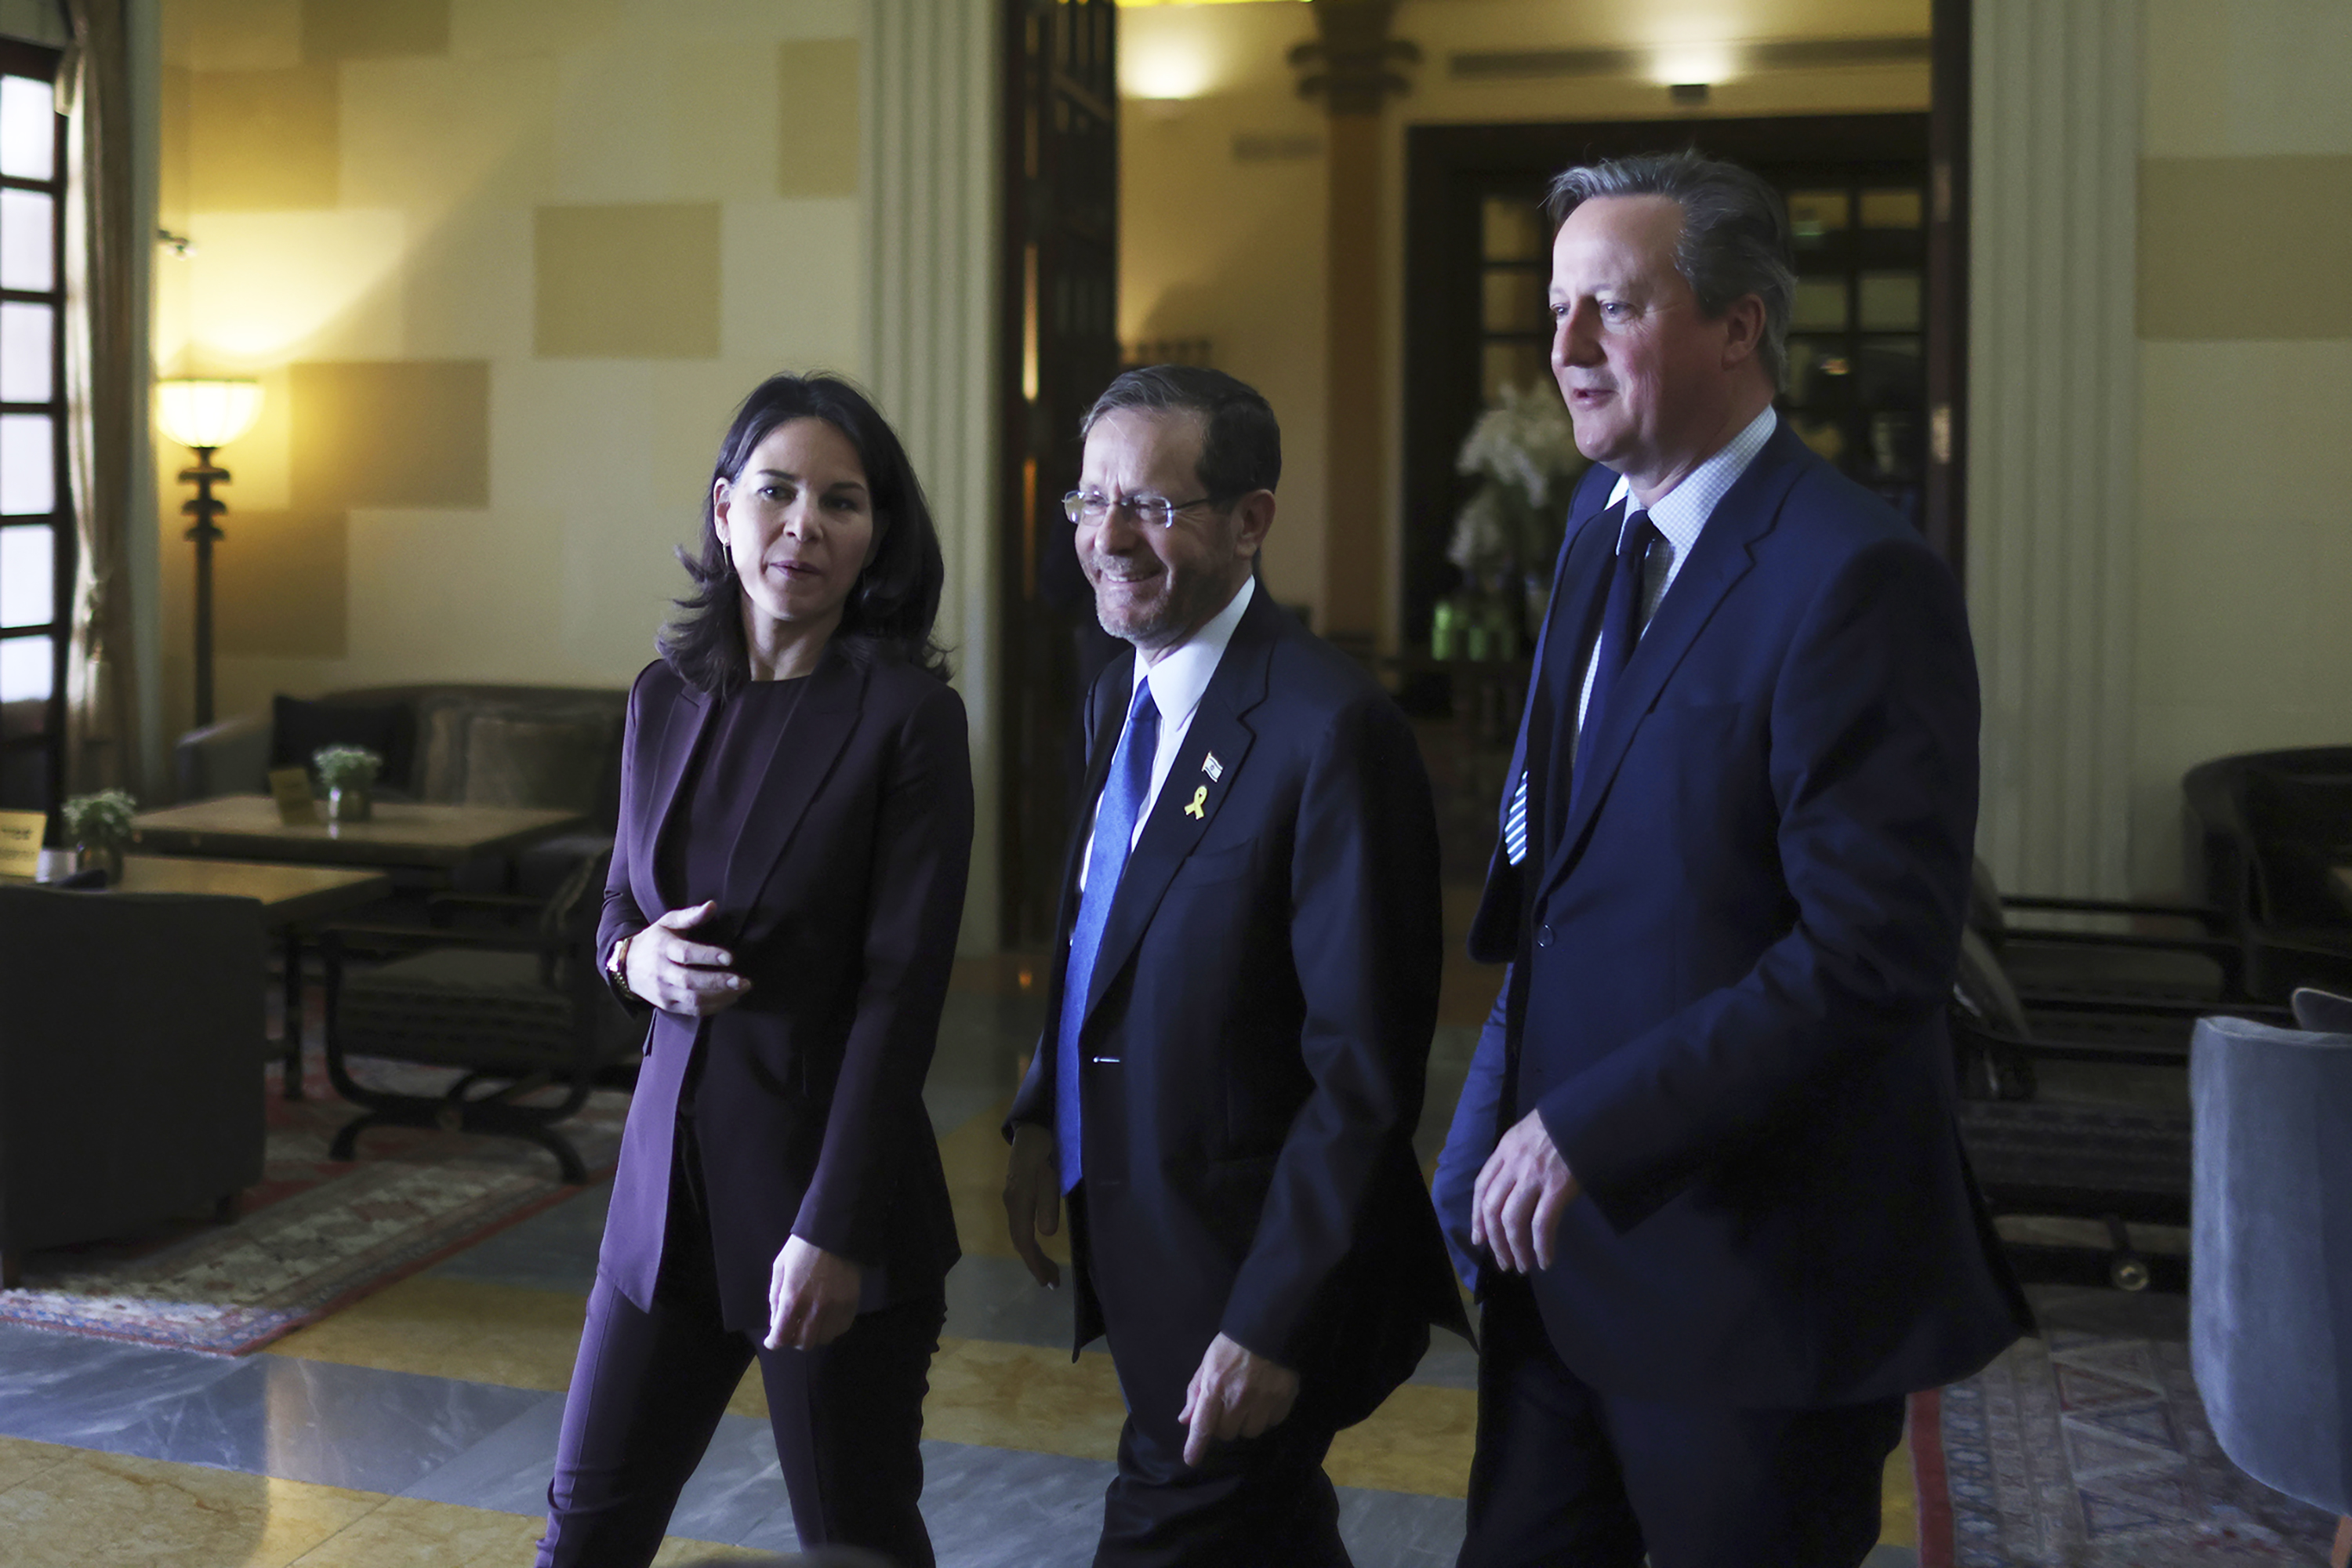 Germany's Foreign Minister Annalena Baerbock (L) and UK Foreign Secretary David Cameron (R) arrive for a meeting with Israeli President Isaac Herzog (C) at a hotel in Jerusalem on April 17.